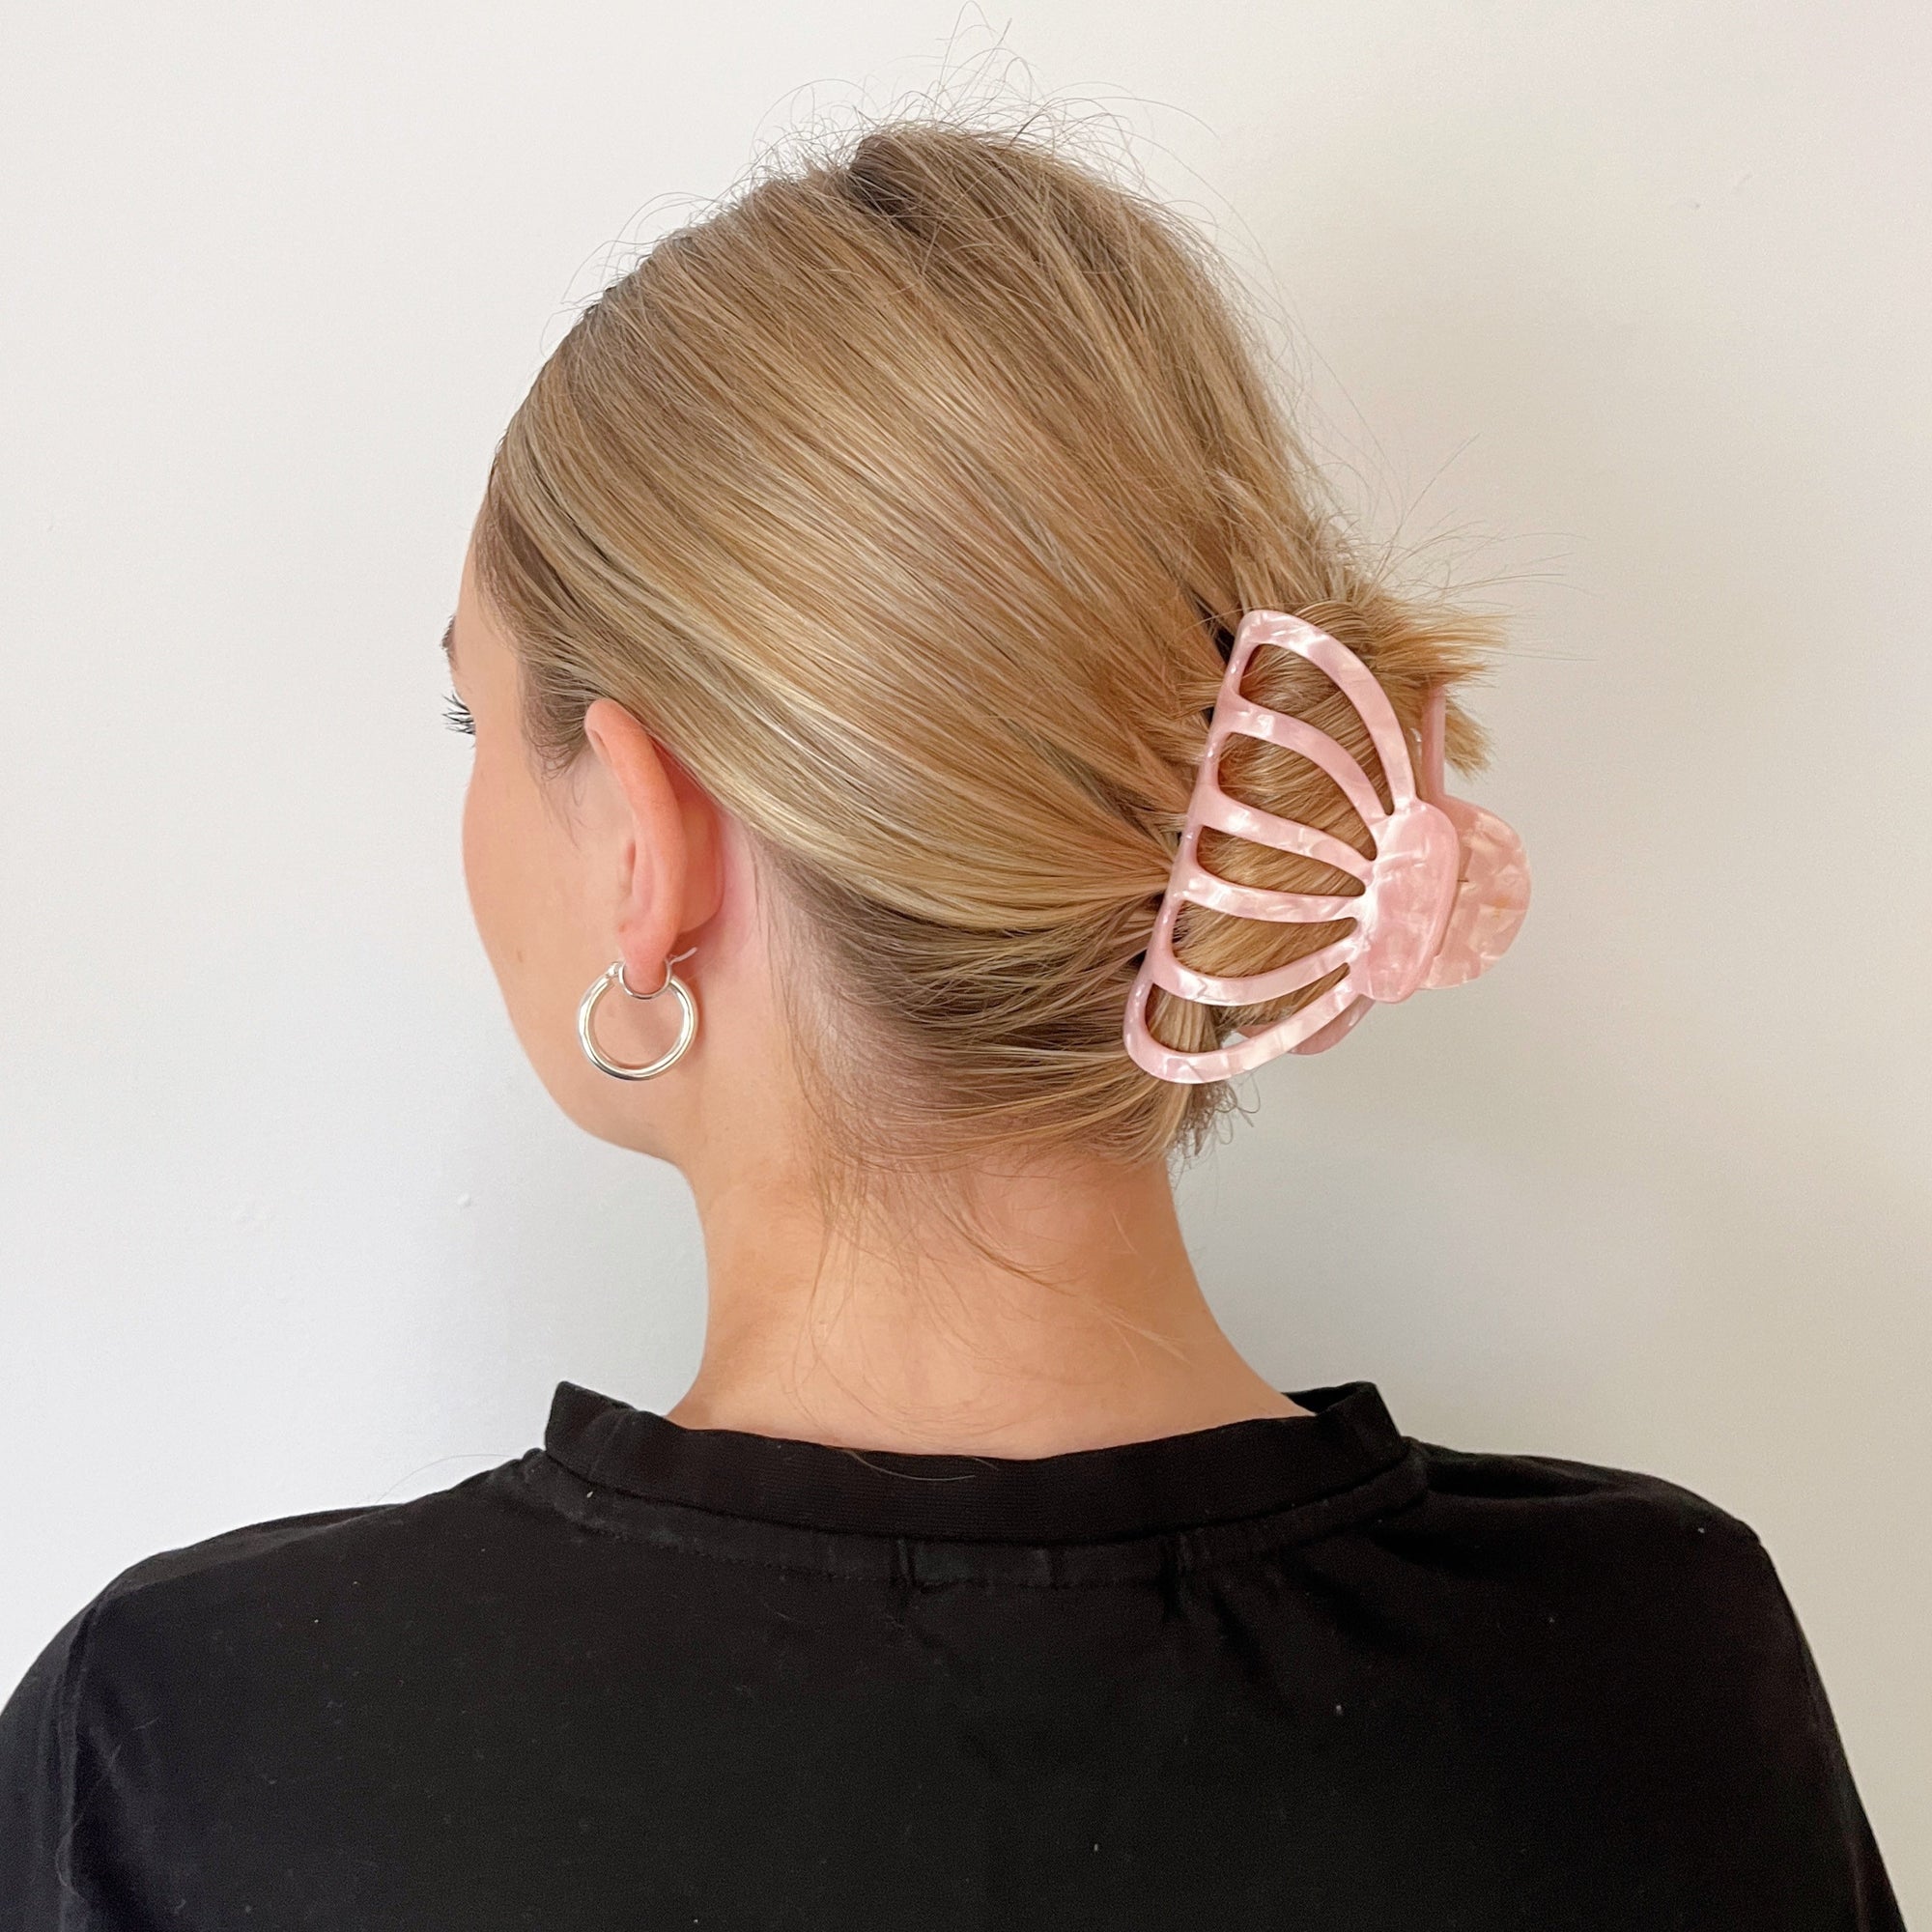 Meet AYYO!  The wide rounded claw has crossover interlocking which creates a secure hold for even the thickest hair. Great for an all up look or to pull all hair back, even when there’s a lot of it.  Each clip comes in a branded Tort pouch (colours change seasonally).  Size: 10.5cm  Colour: pearlescent pink with a satin finish  Material: eco-resin